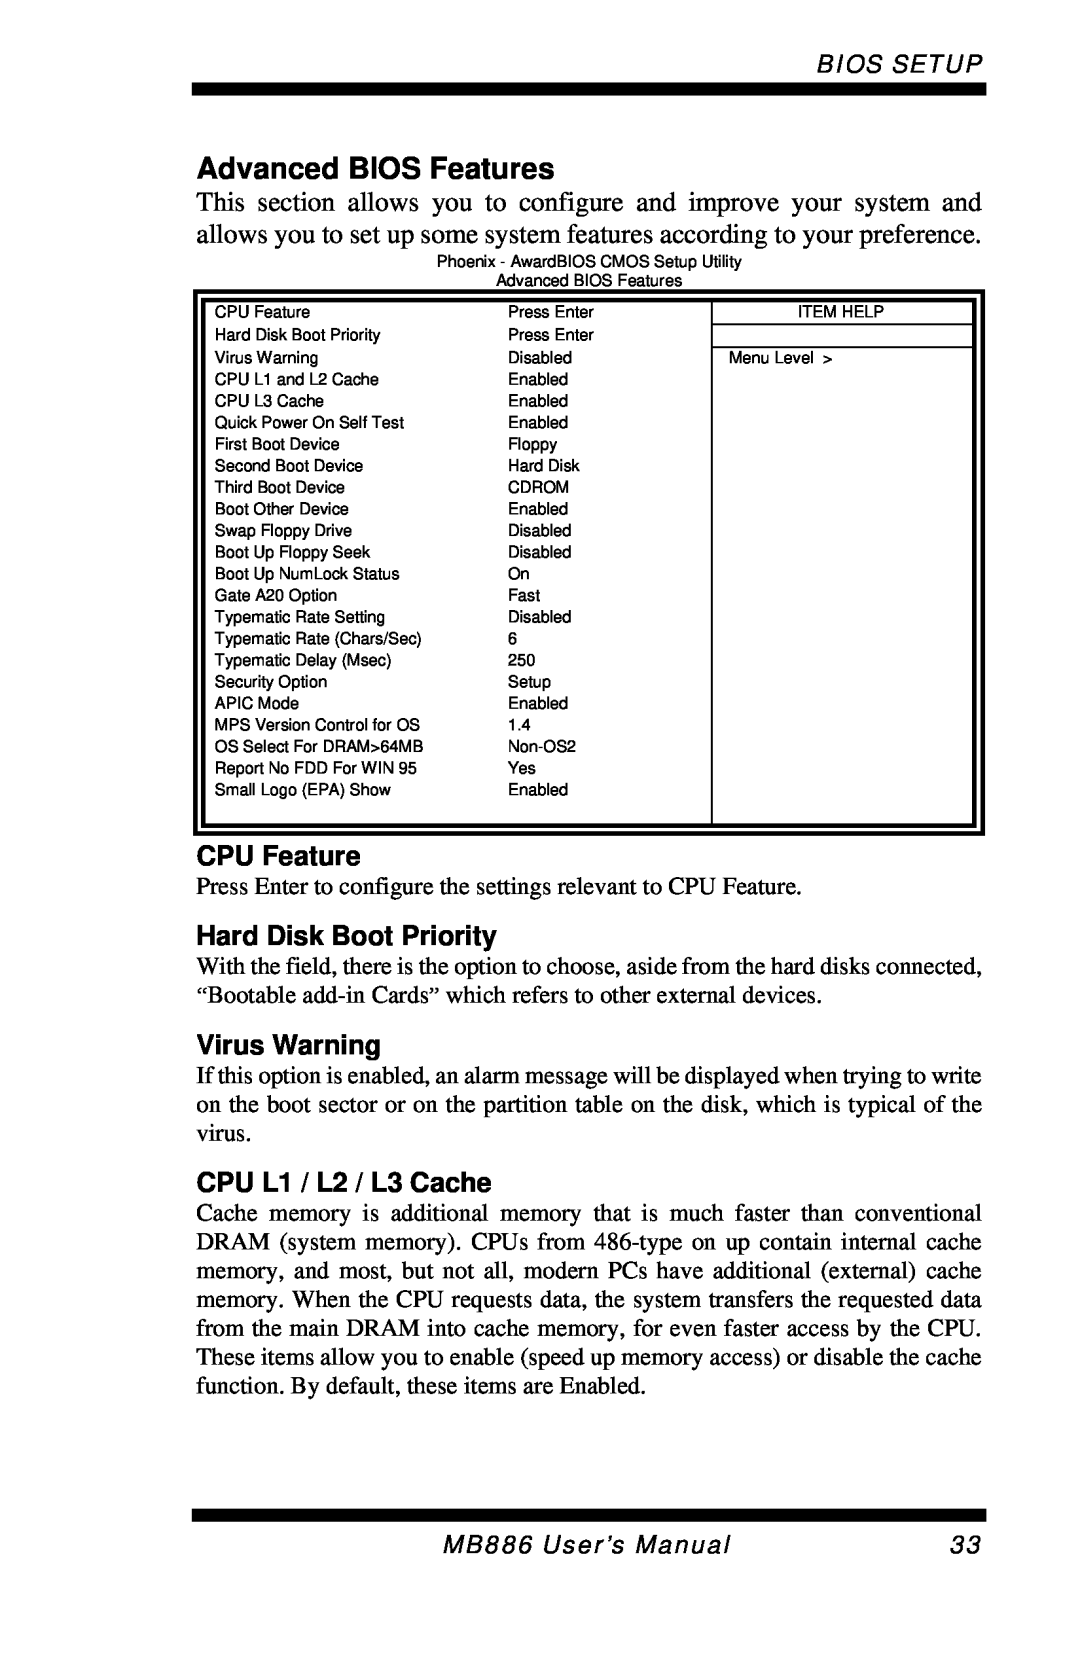 Intel MB886 user manual Advanced BIOS Features, CPU Feature, Hard Disk Boot Priority, Virus Warning, CPU L1 / L2 / L3 Cache 